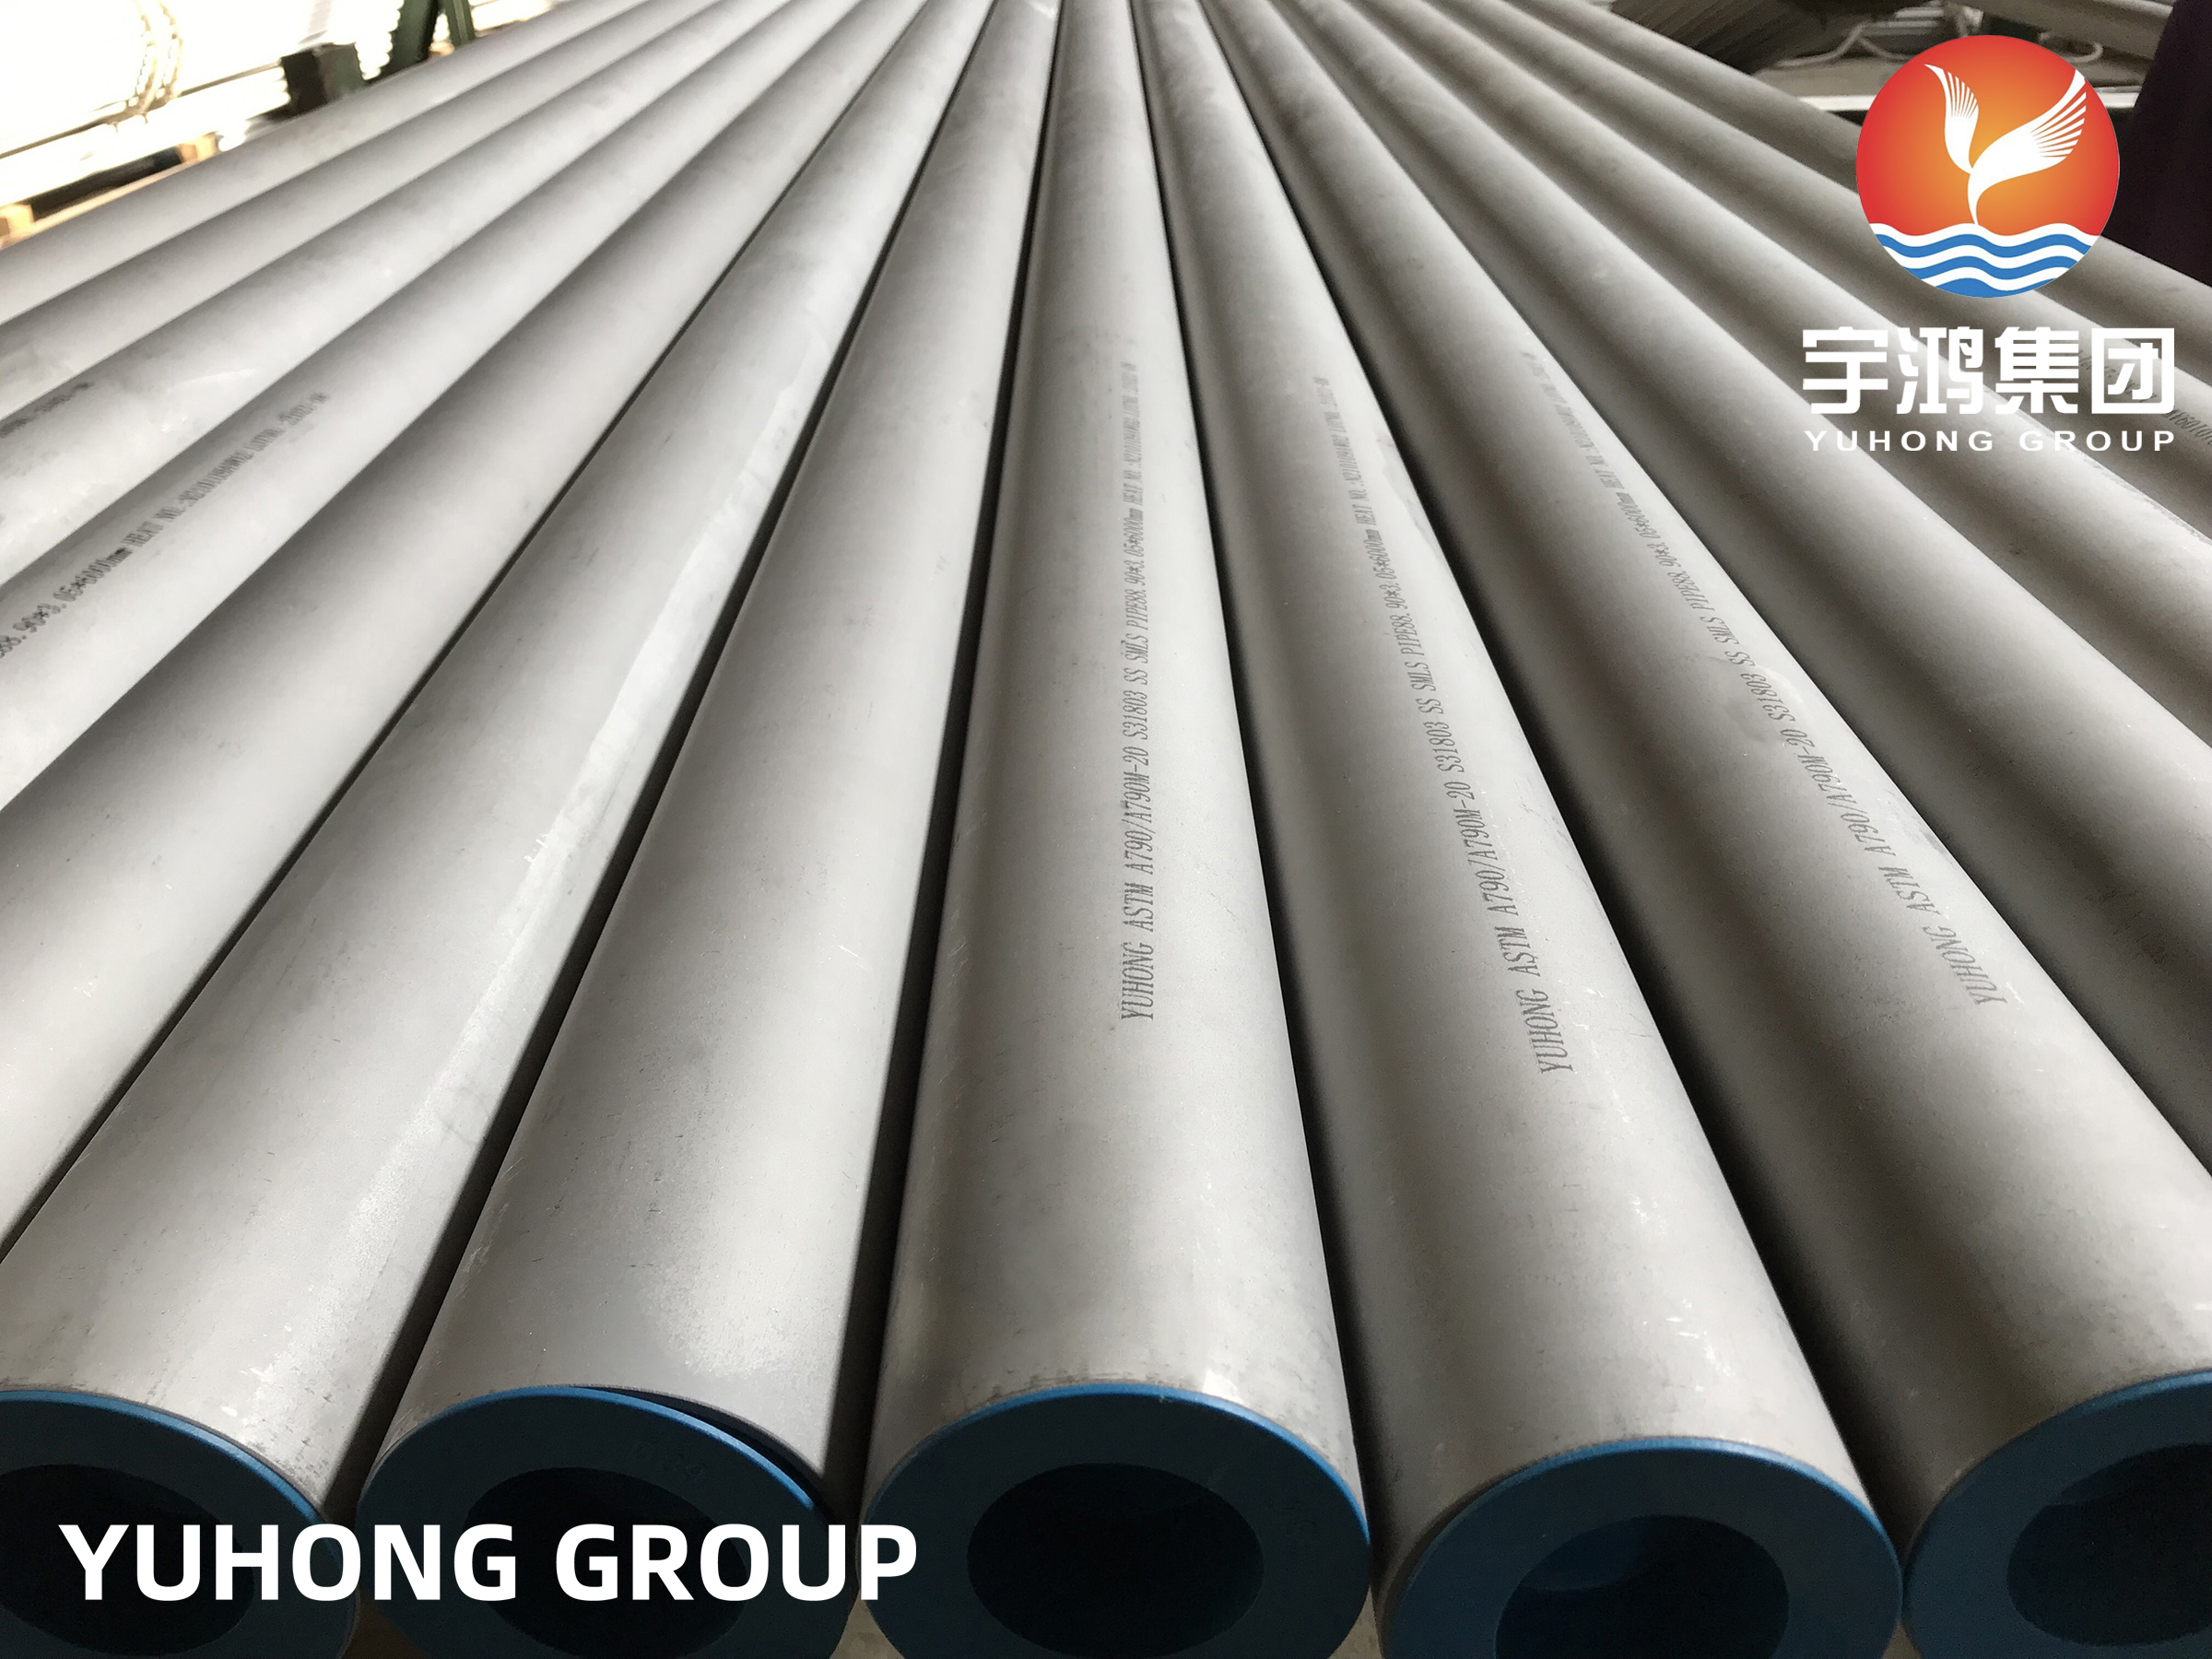 Duplex Stainless Steel Pipe/Tube for Sale